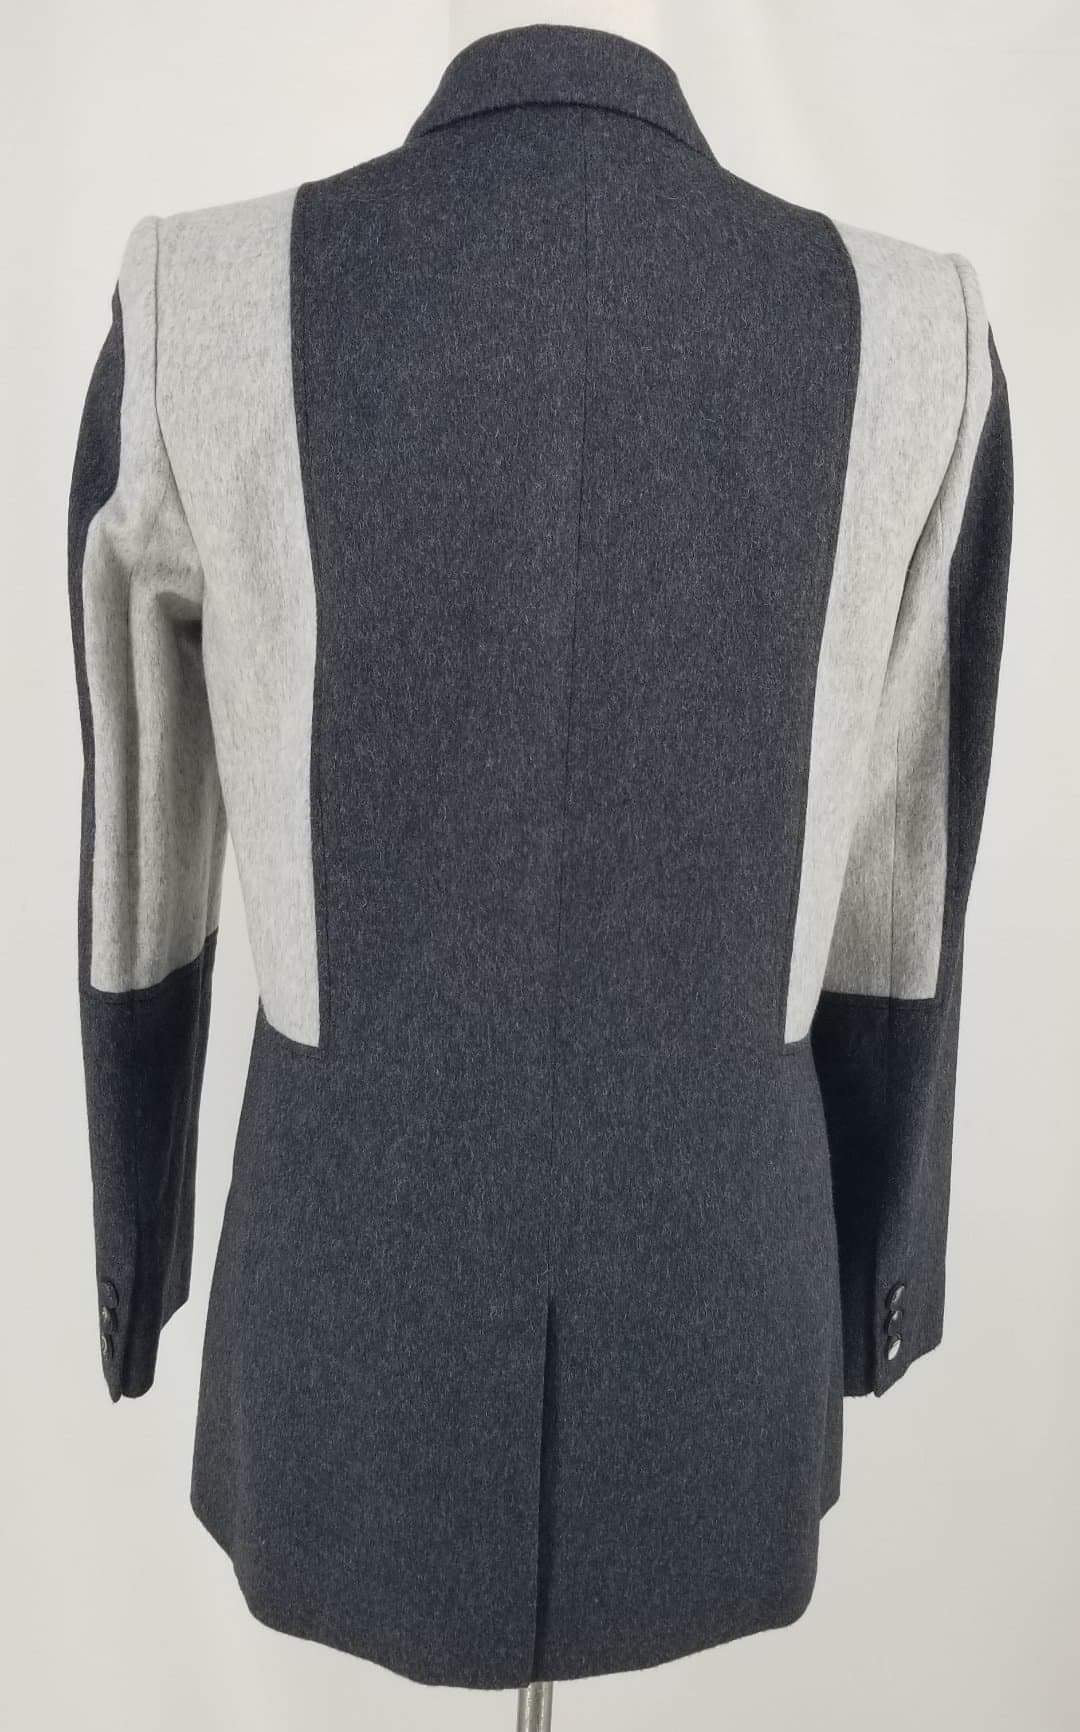 Authentic Helmut Lang Charcoal grey and light grey Wool Jacket Sz 6